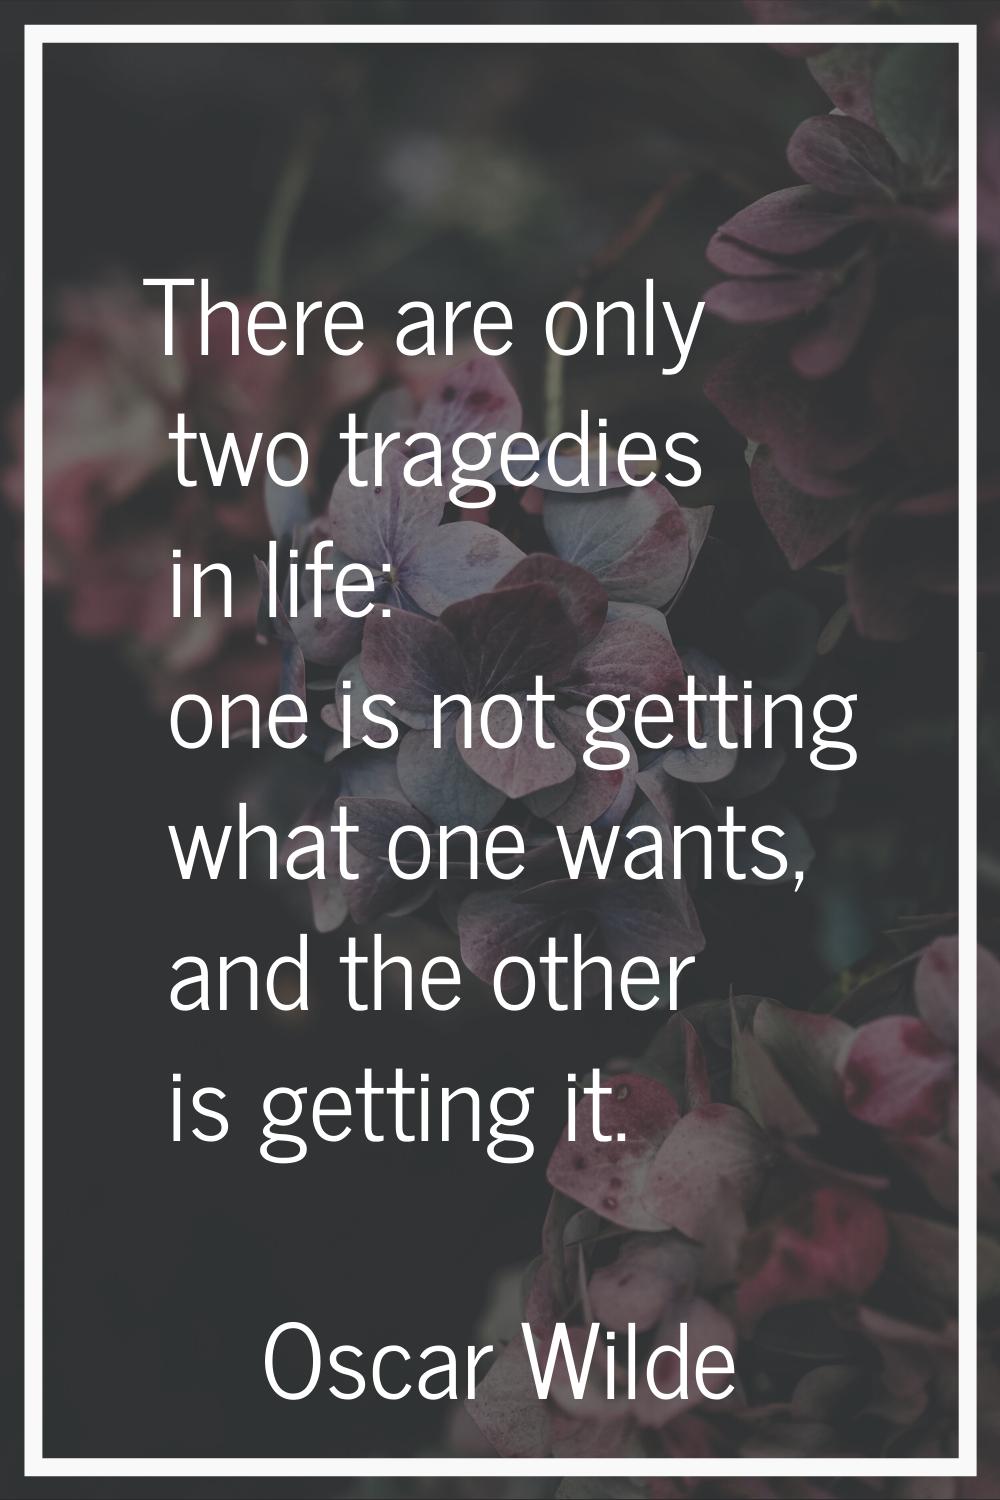 There are only two tragedies in life: one is not getting what one wants, and the other is getting i